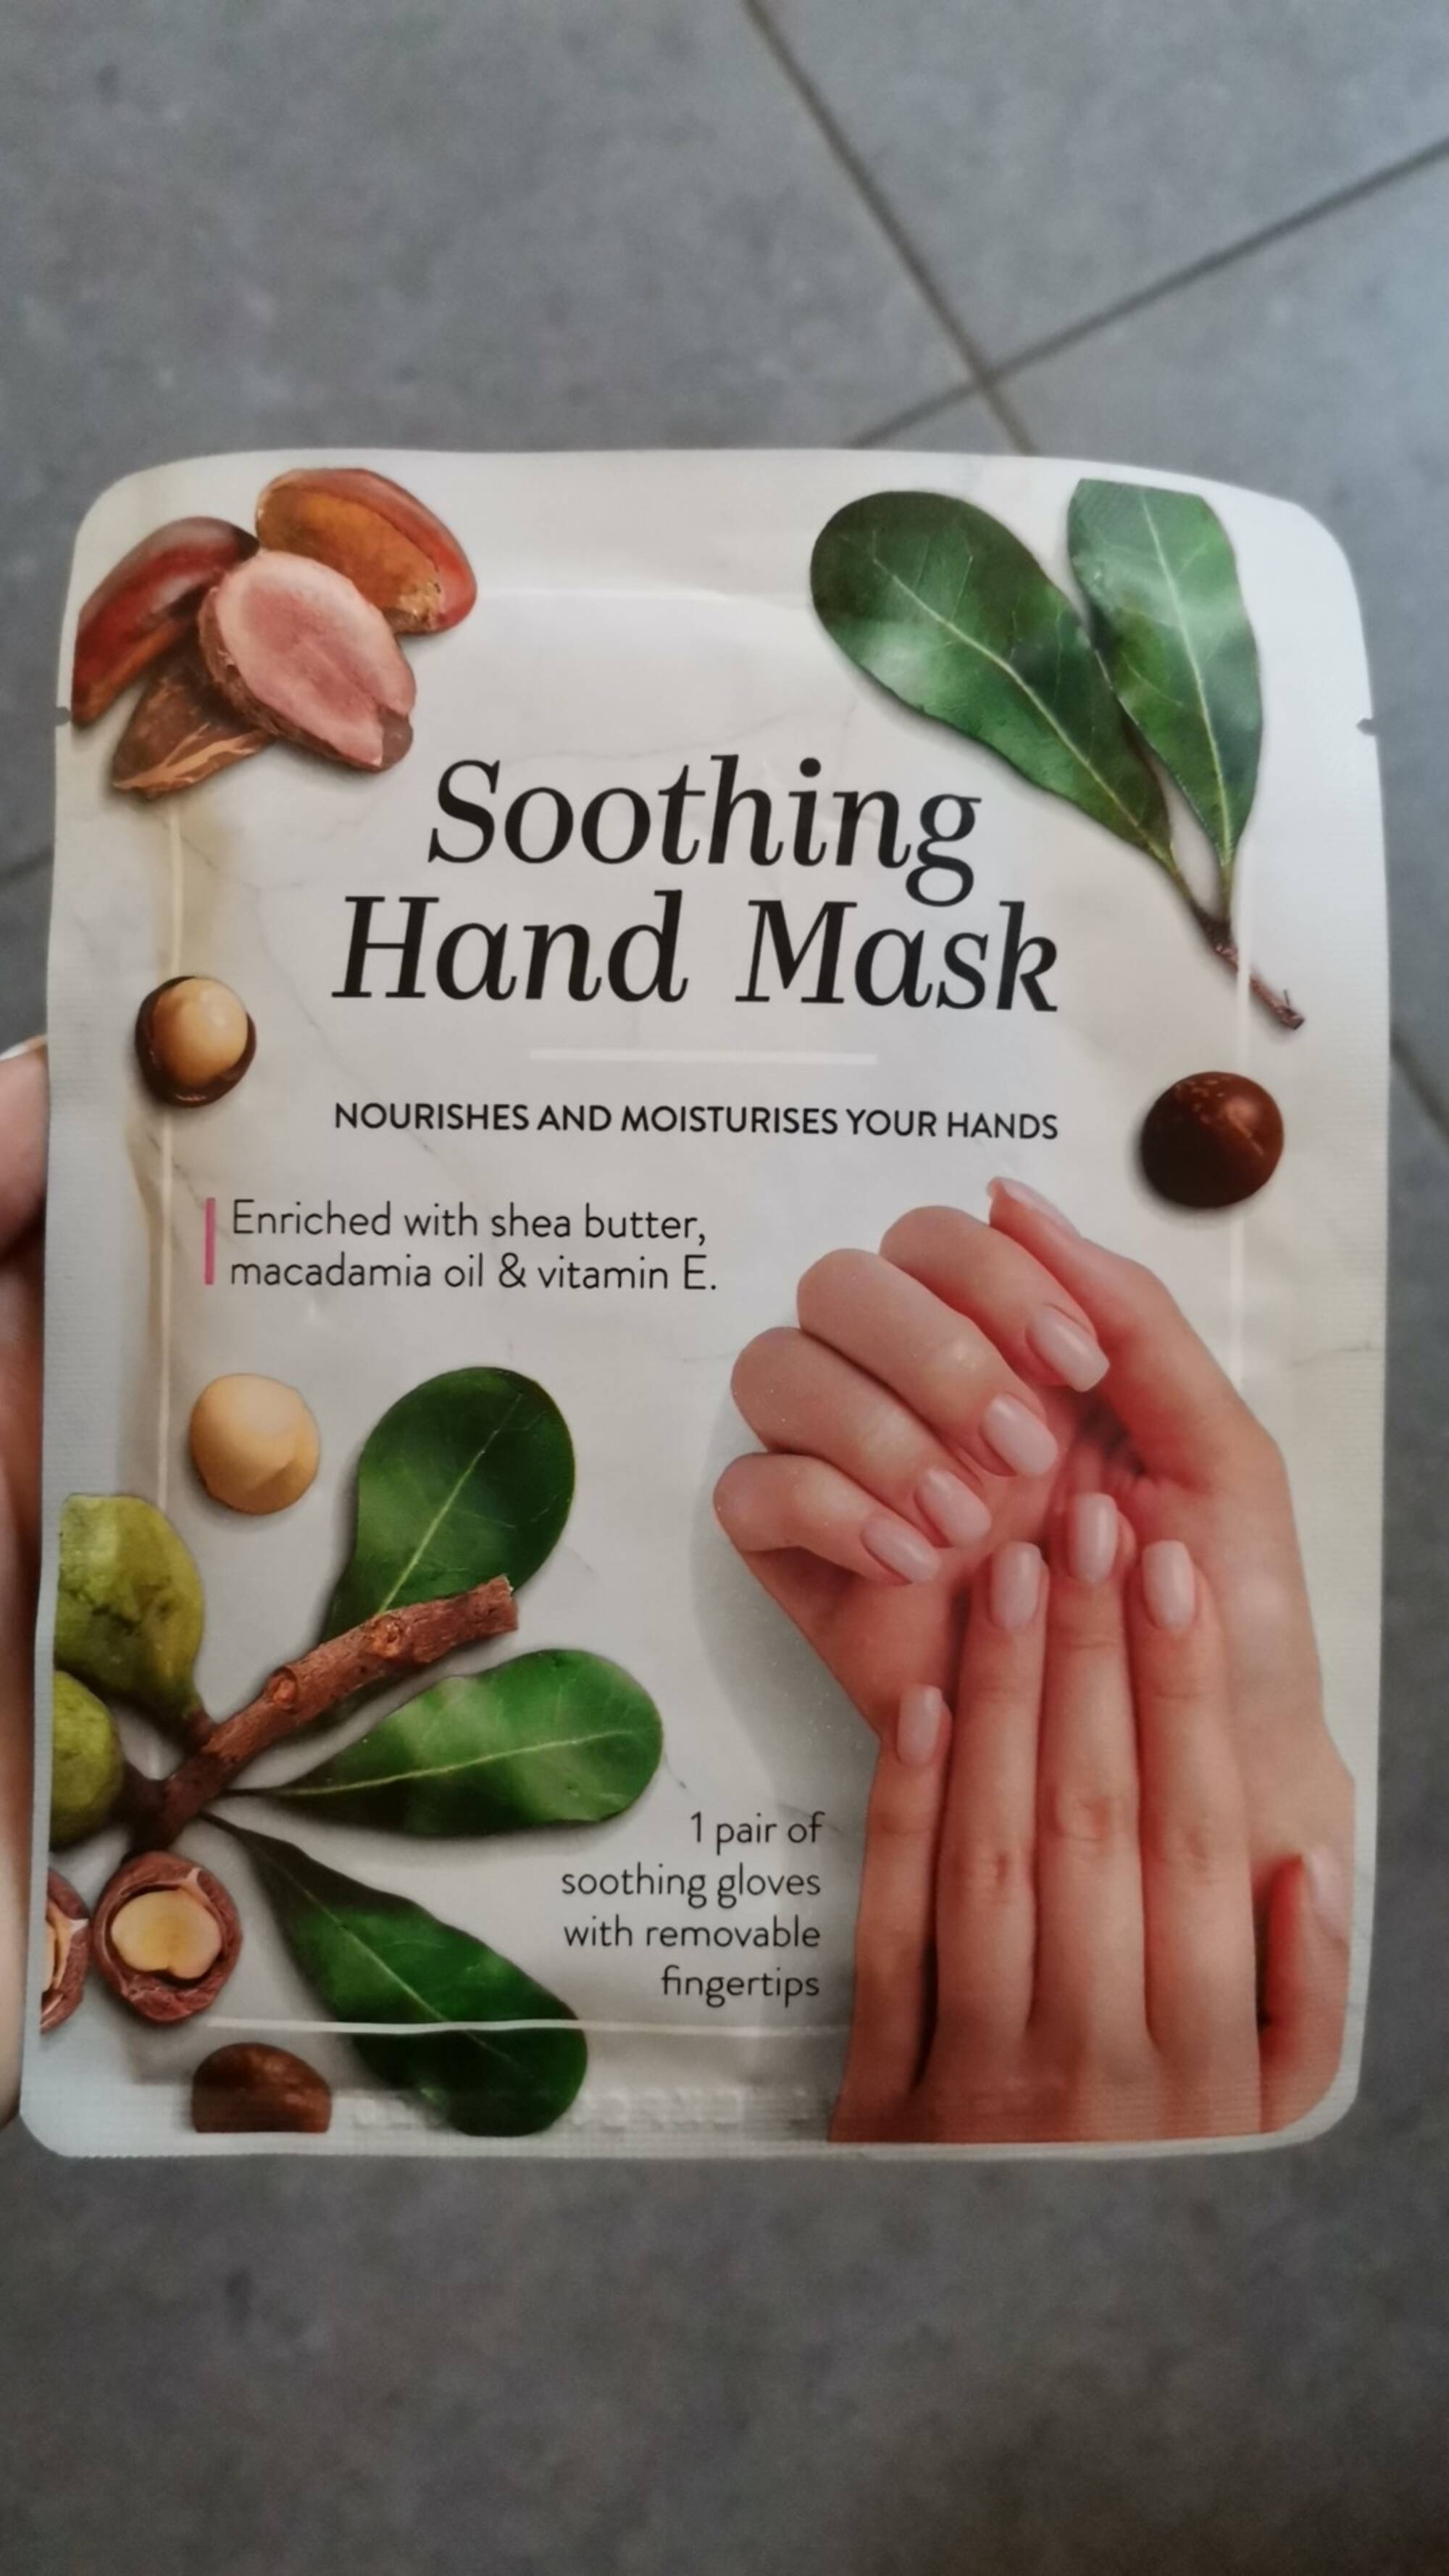 MASCOT EUROPE BV - Soothing hand mask